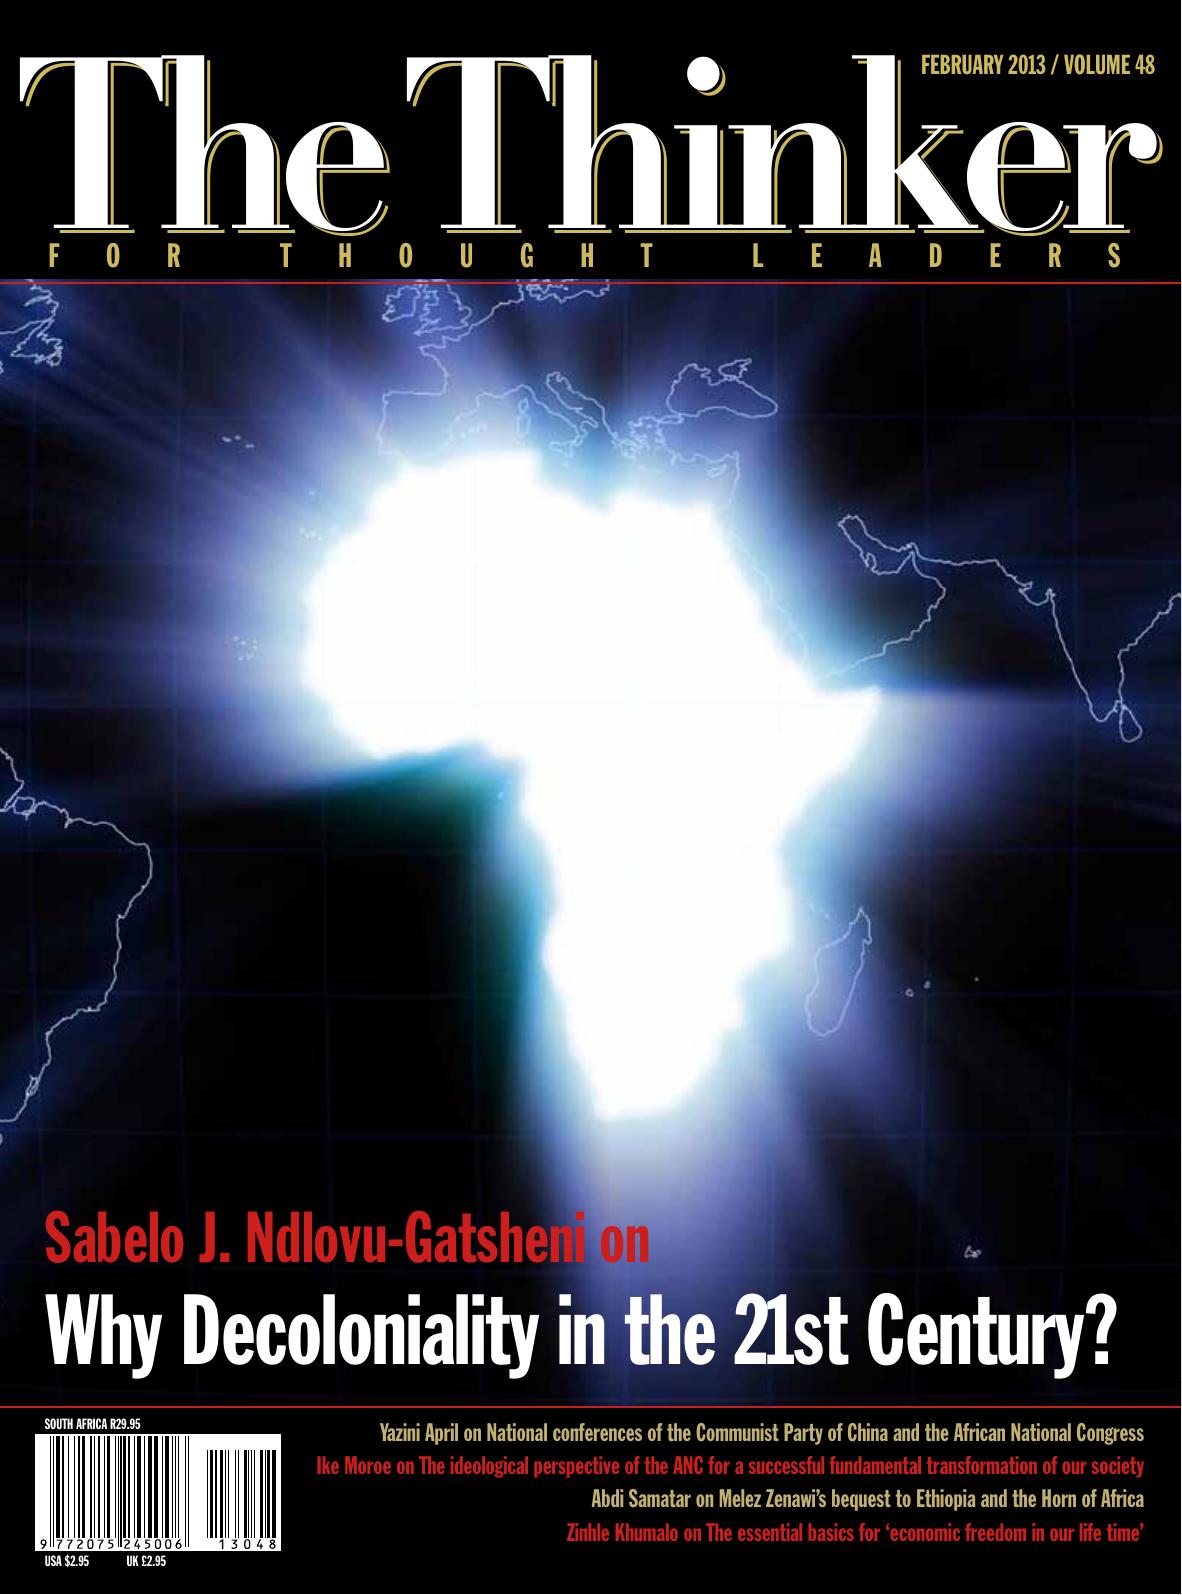 Why Decoloniality in the 21st Century